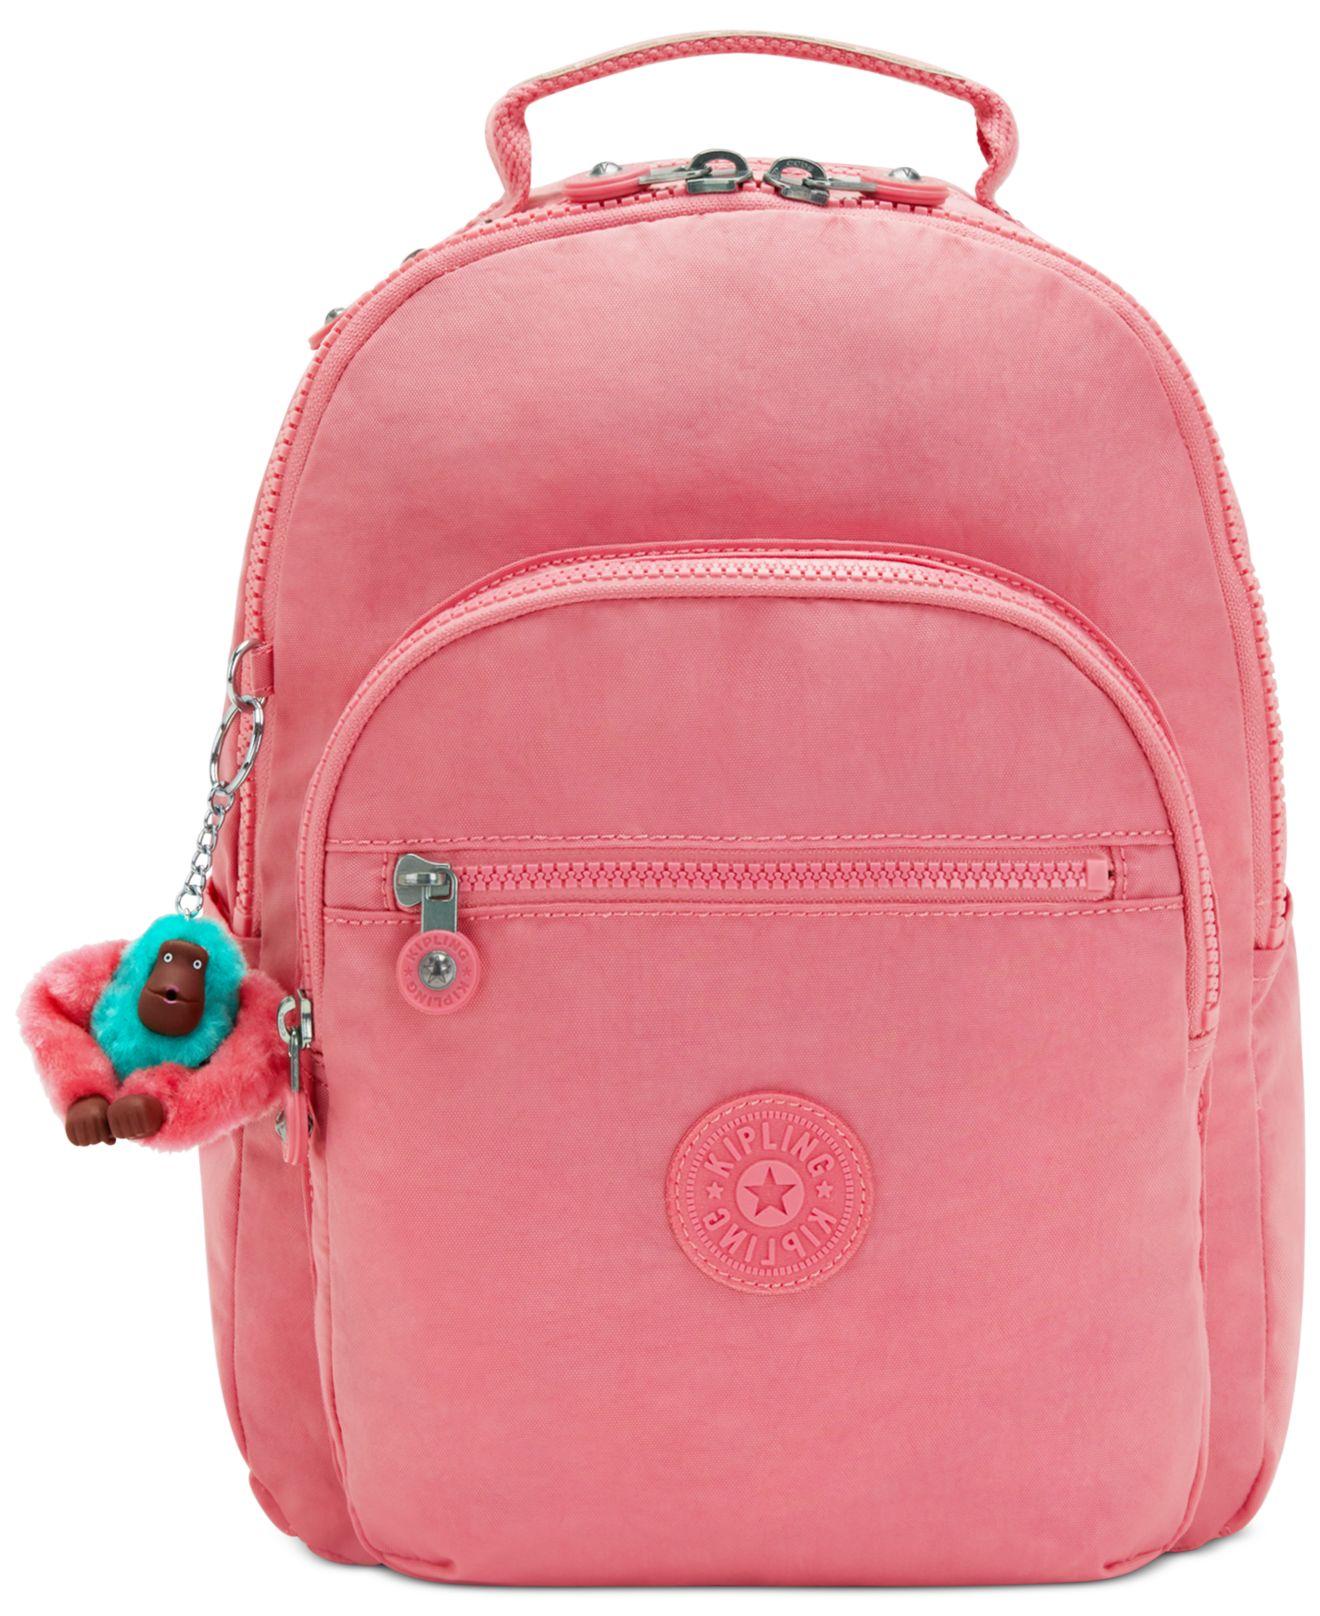 Kipling Seoul Small Backpack in Pink | Lyst